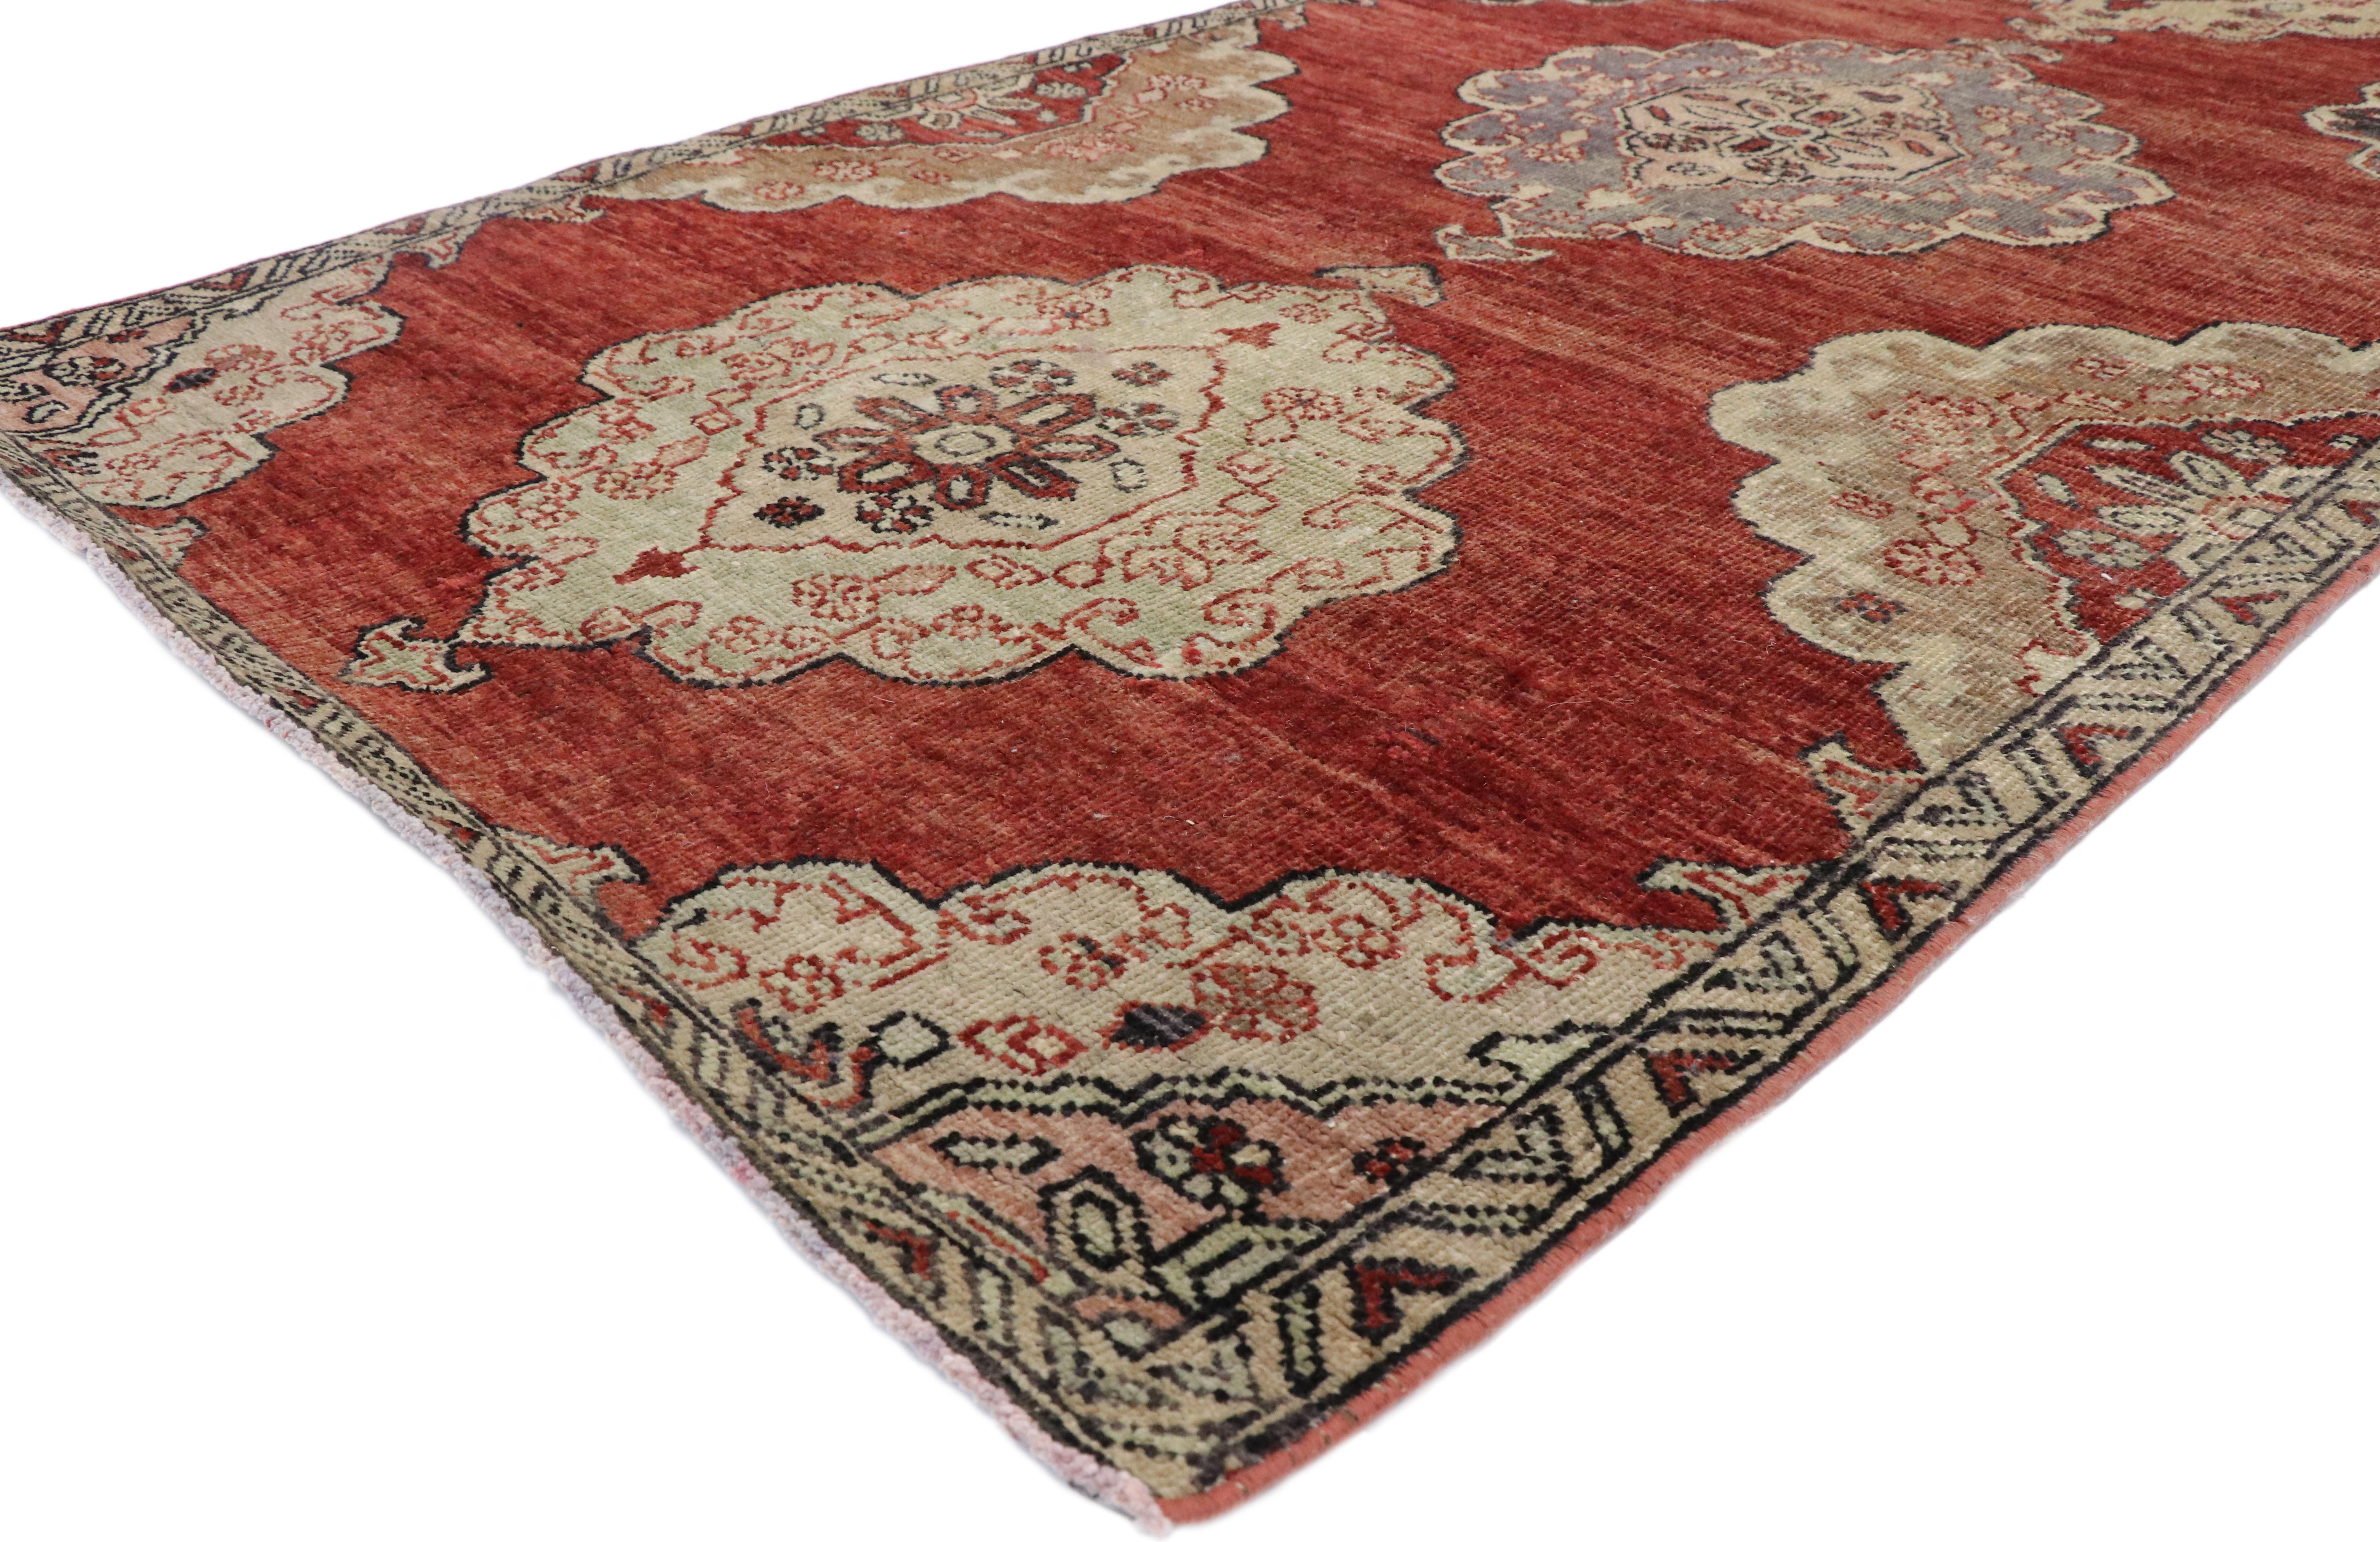 52251 Vintage Turkish Oushak Runner with English Tudor Jacobean Style. Rich in color, intricate details, and timeless design aesthetics, this hand-knotted wool vintage Turkish Oushak runner beautifully embodies English Tudor and Jacobean style.